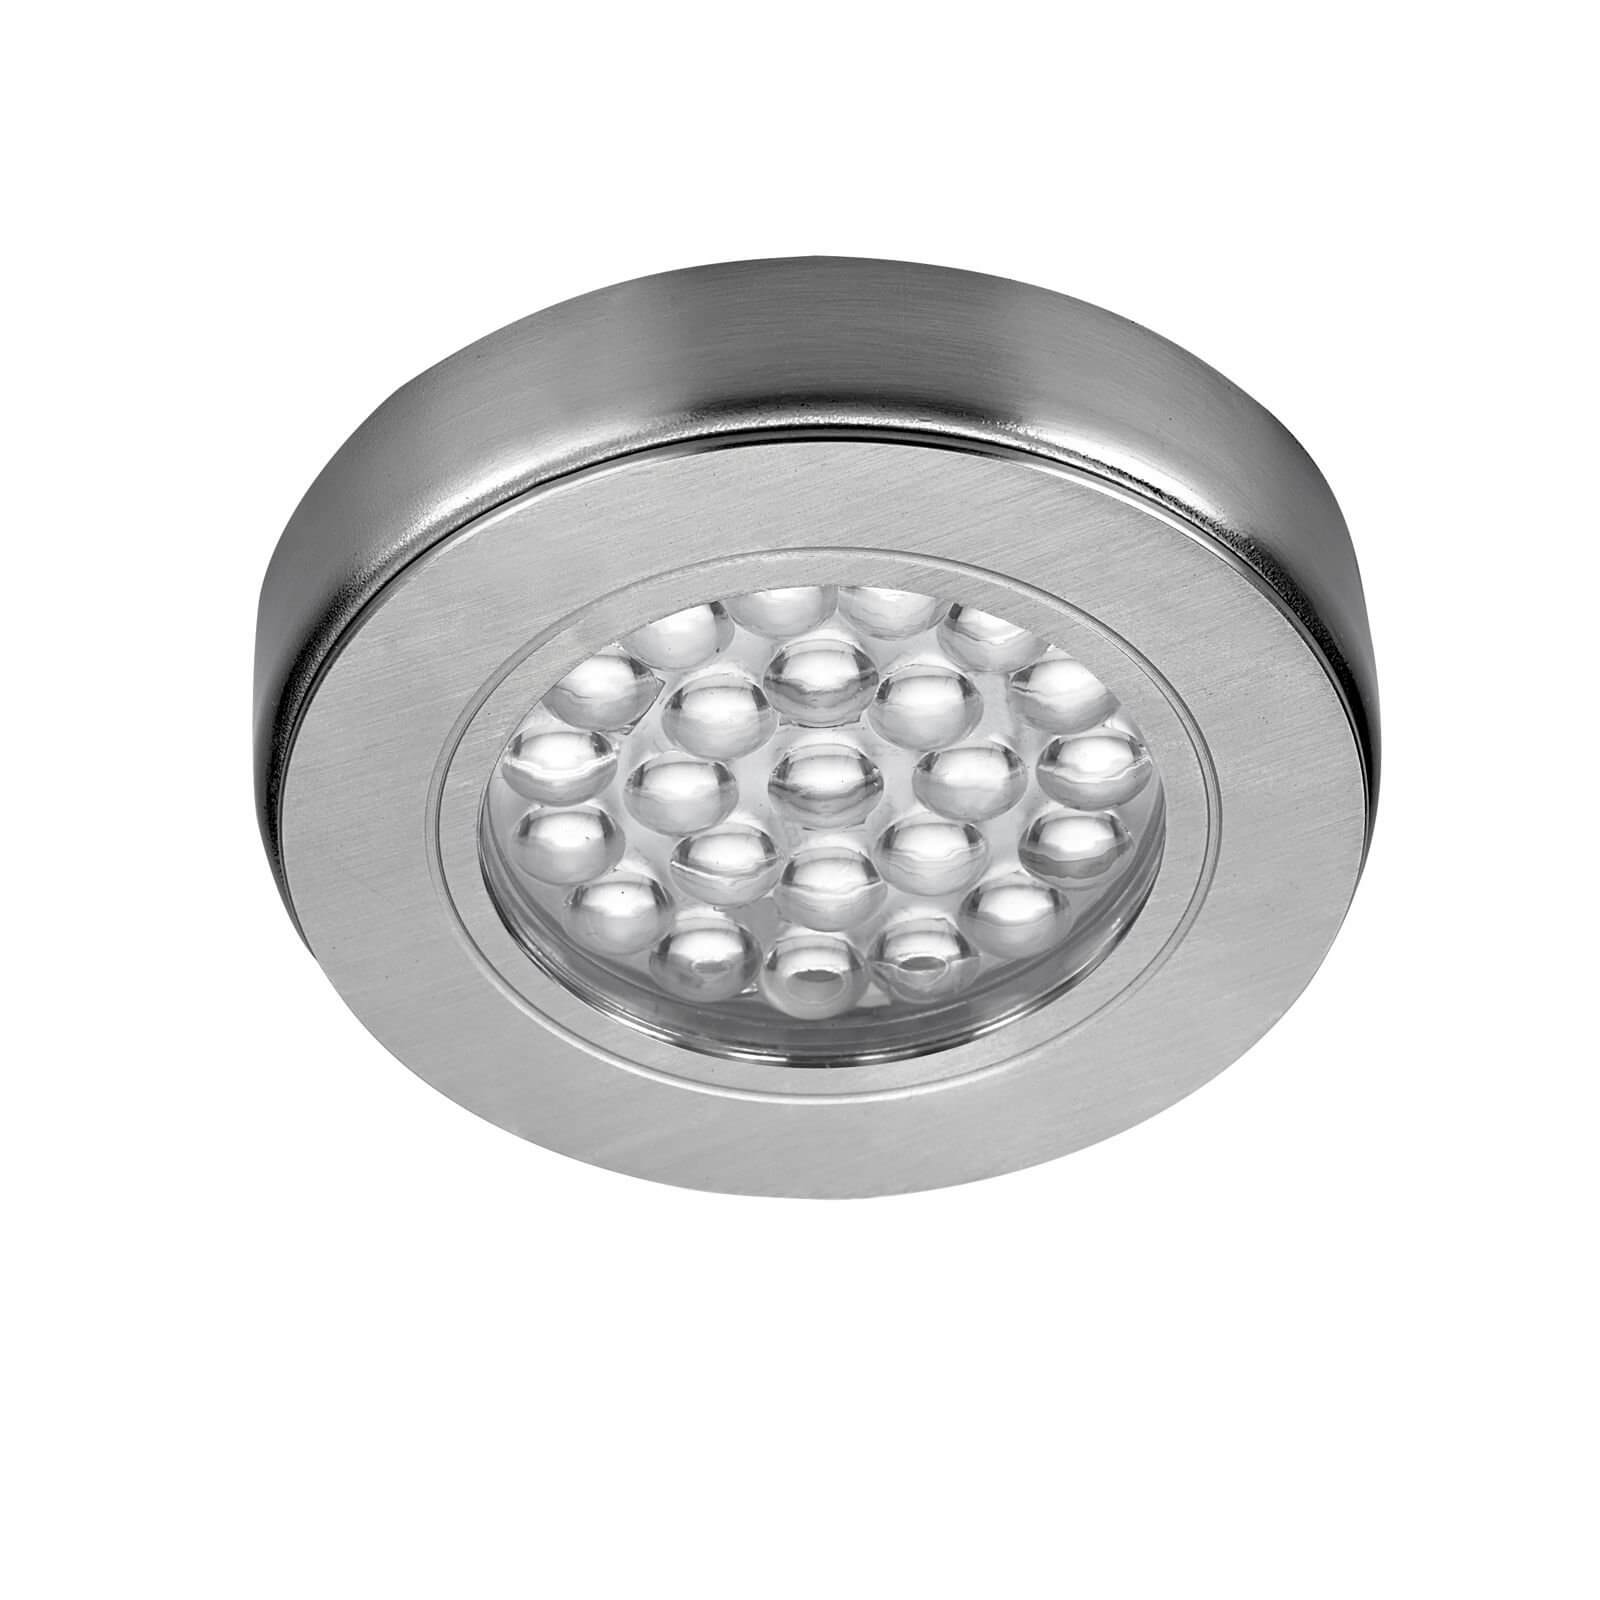 Photo of Under Cabinet Led Surface Light - 3 Pack